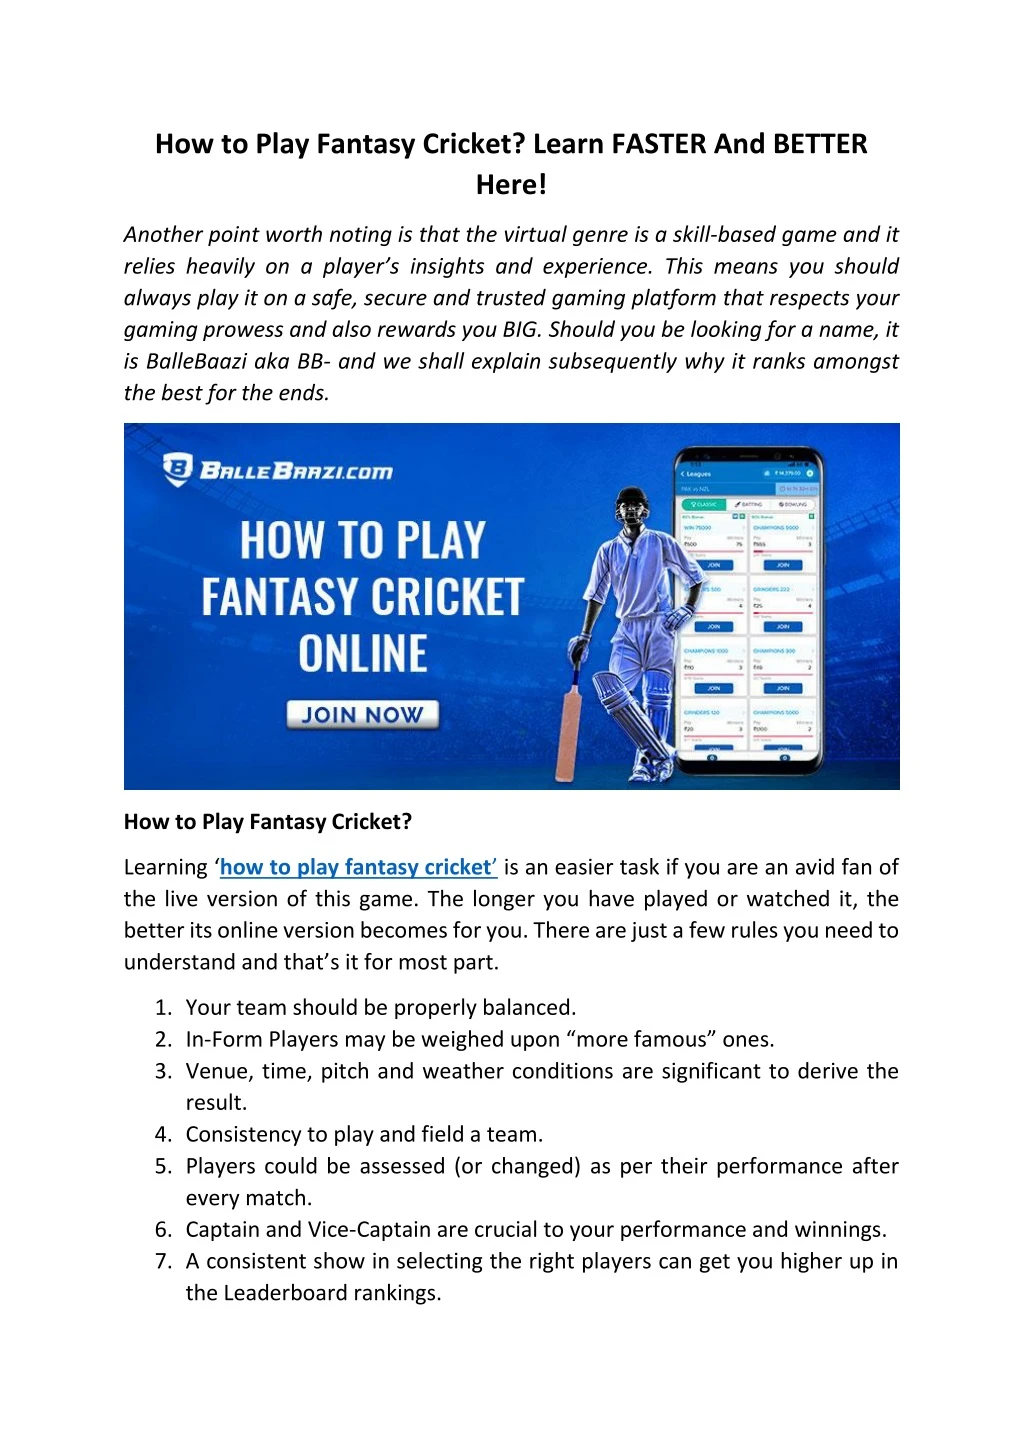 how to play fantasy cricket learn faster